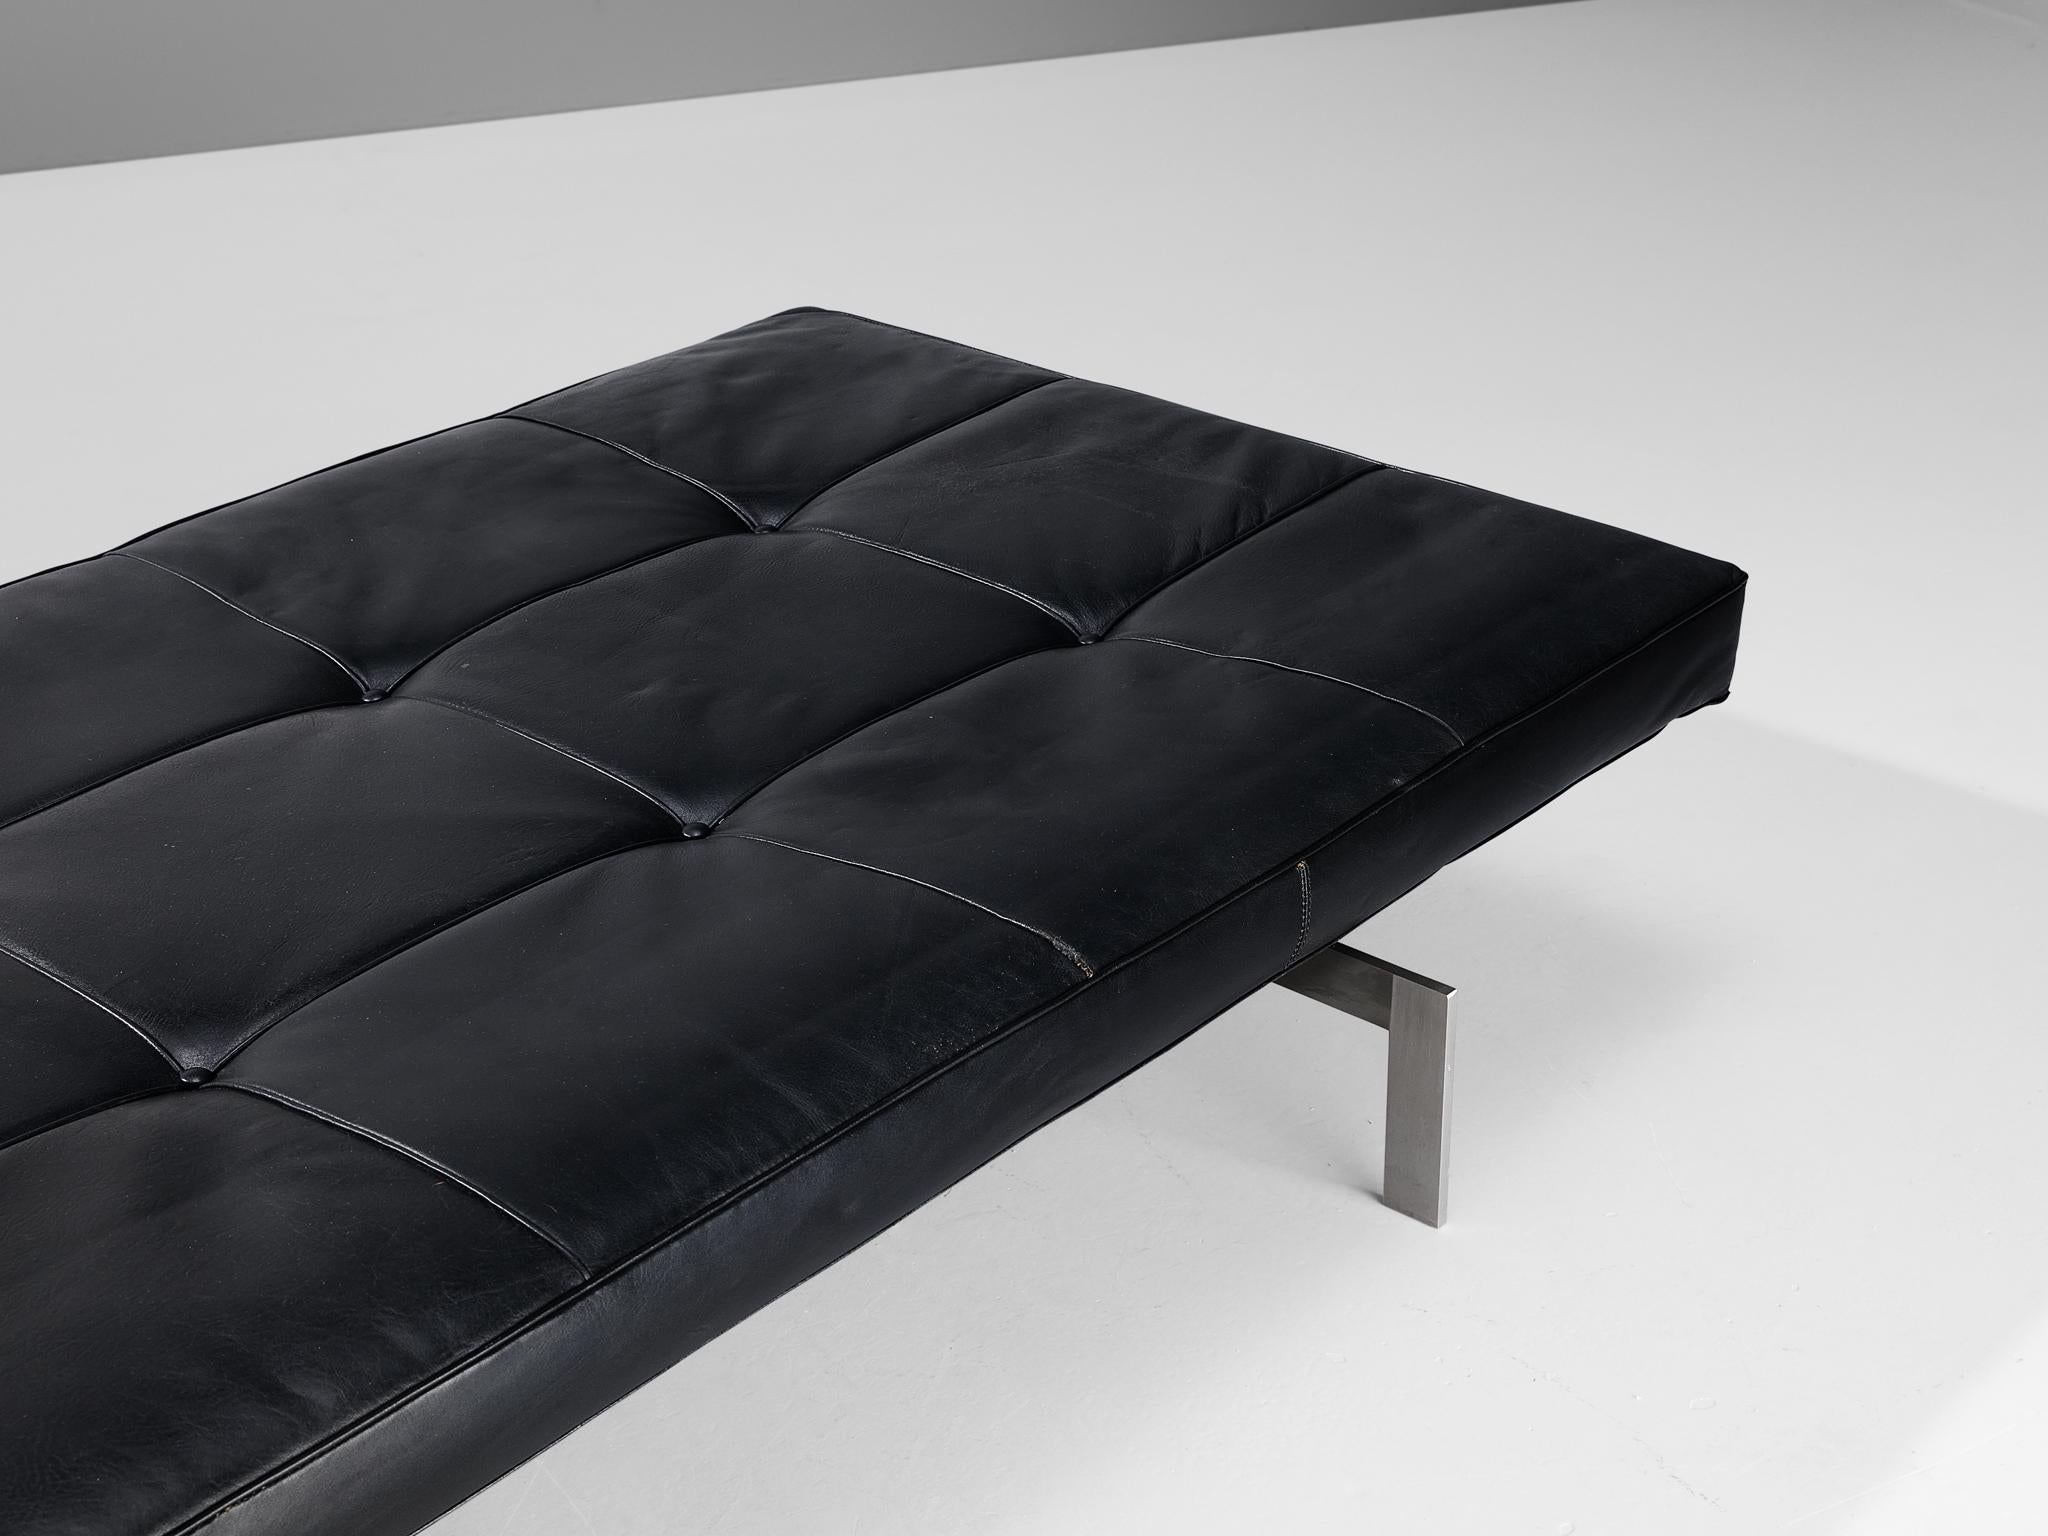 Poul Kjærholm for E. Kold Christensen 'PK80' Daybed in Leather and Steel  1